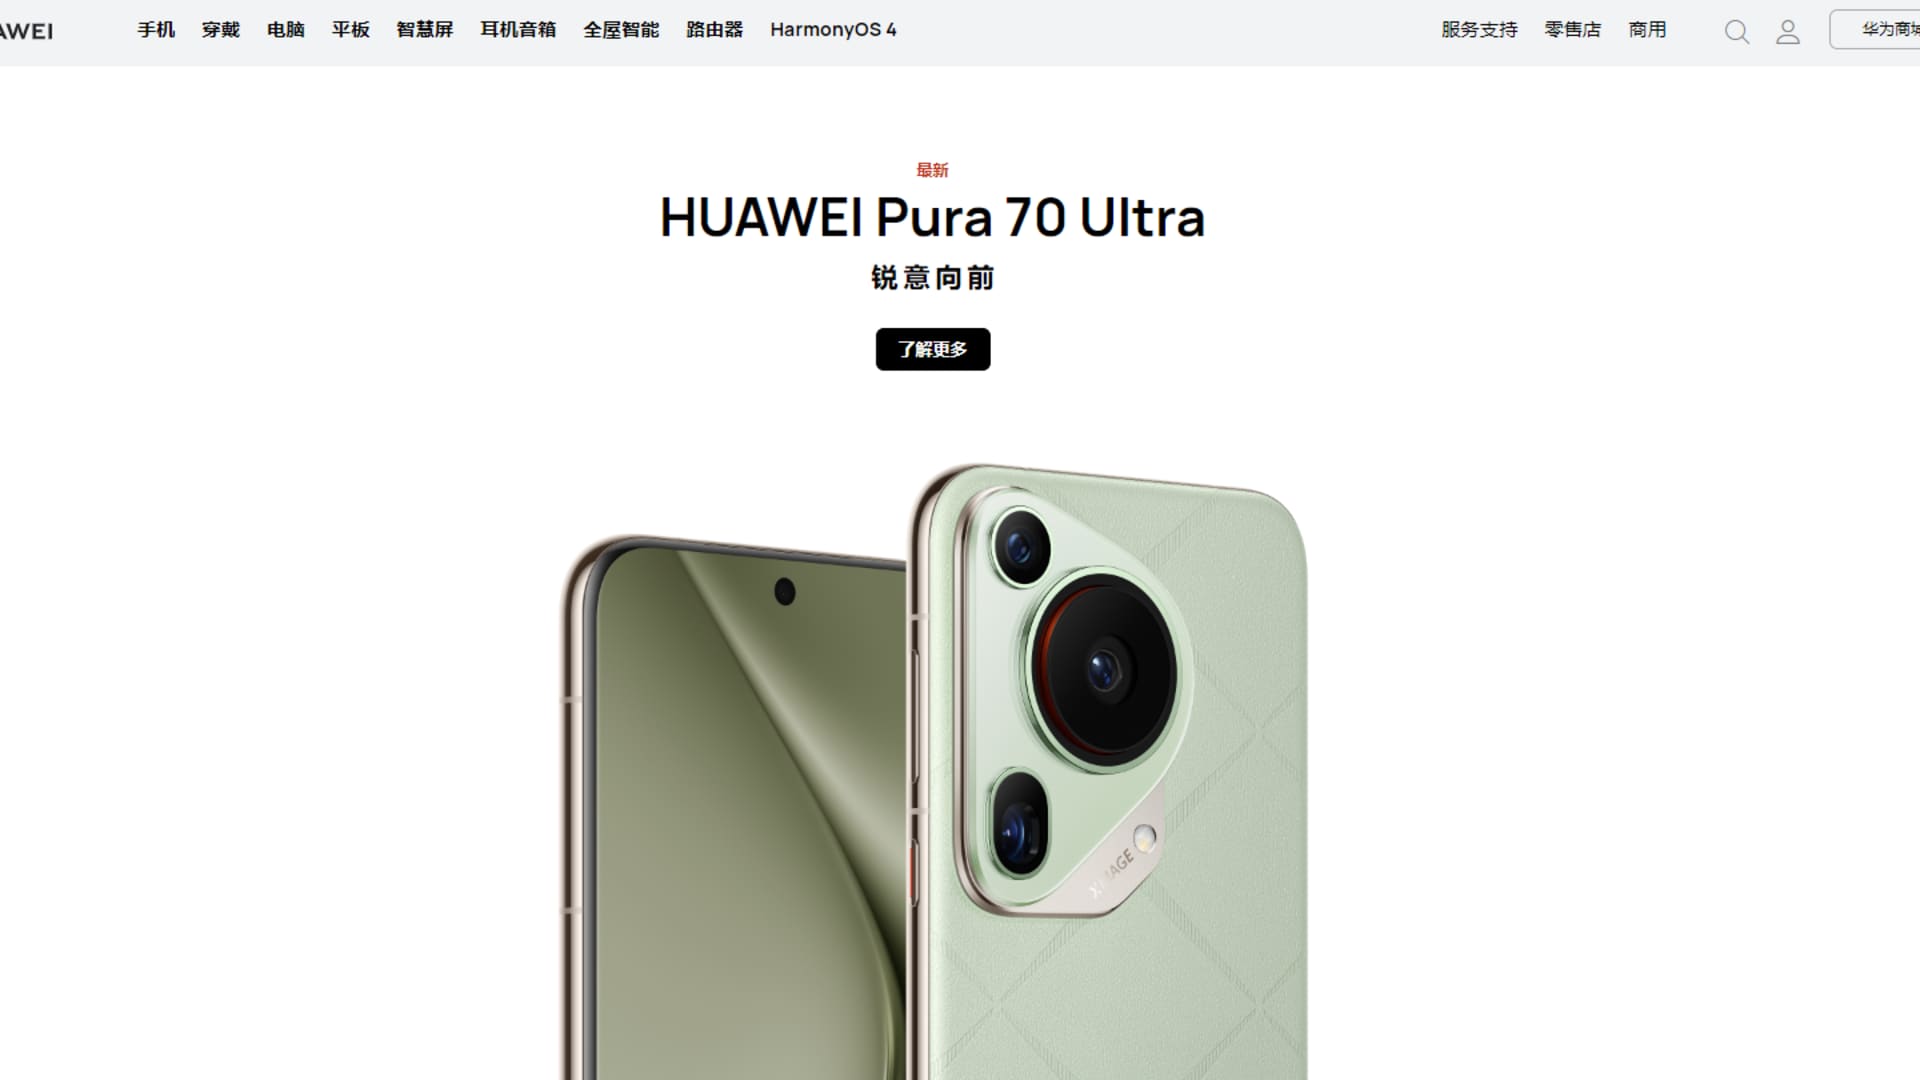 Huawei launches Pura 70 smartphones in challenge to Apple in China